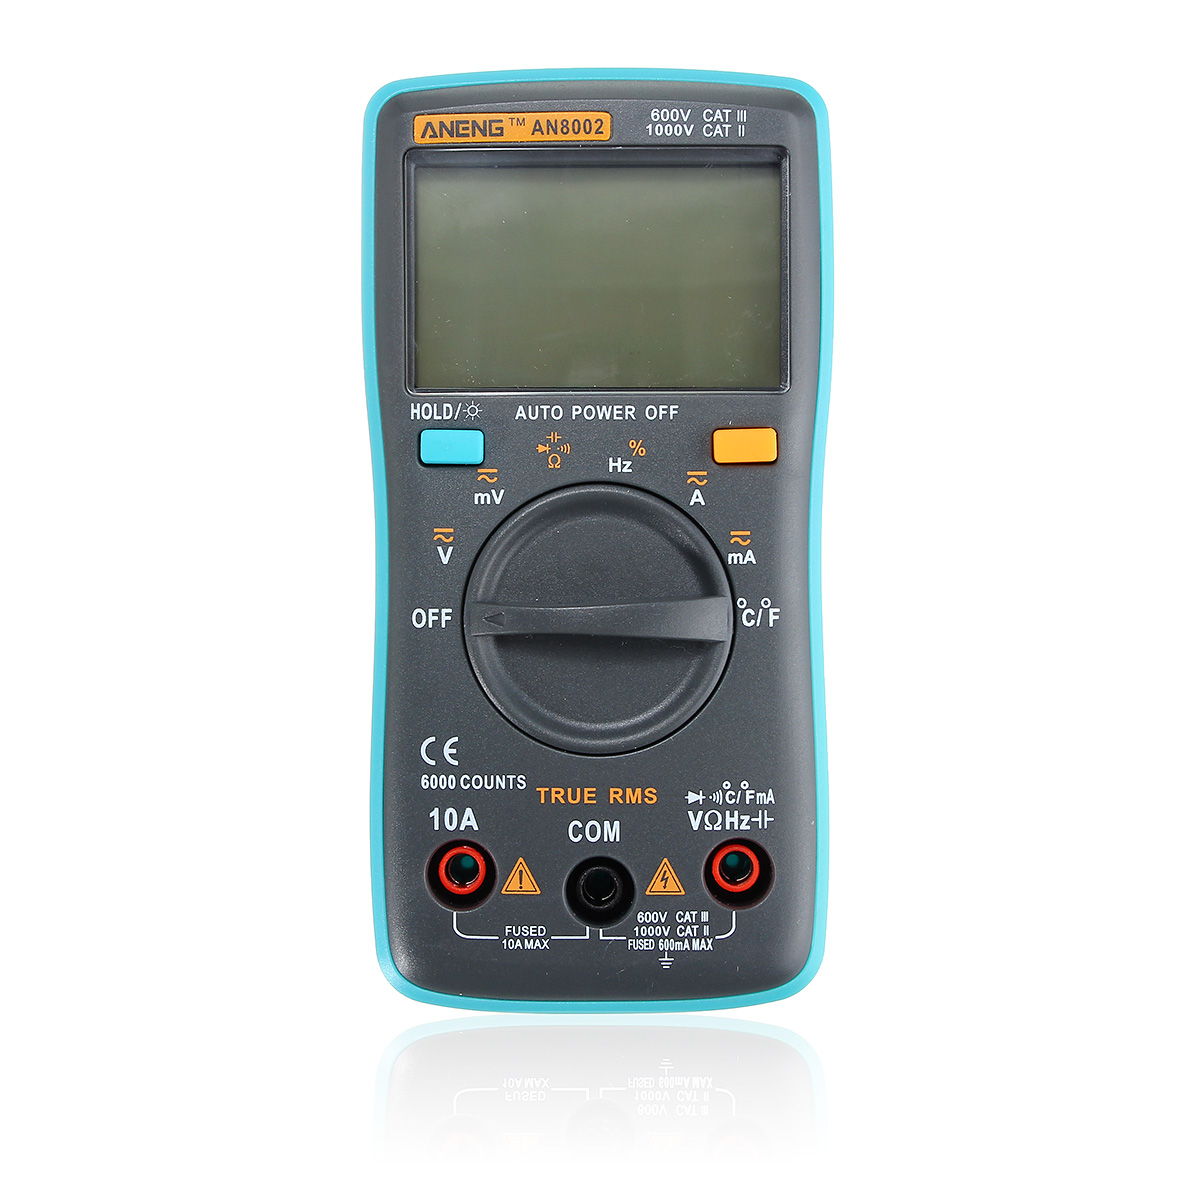 ANENG AN8002 Digital True RMS 6000 Counts Multimeter AC/DC Current Voltage Frequency Resistance Temperature Tester ℃/℉ 56